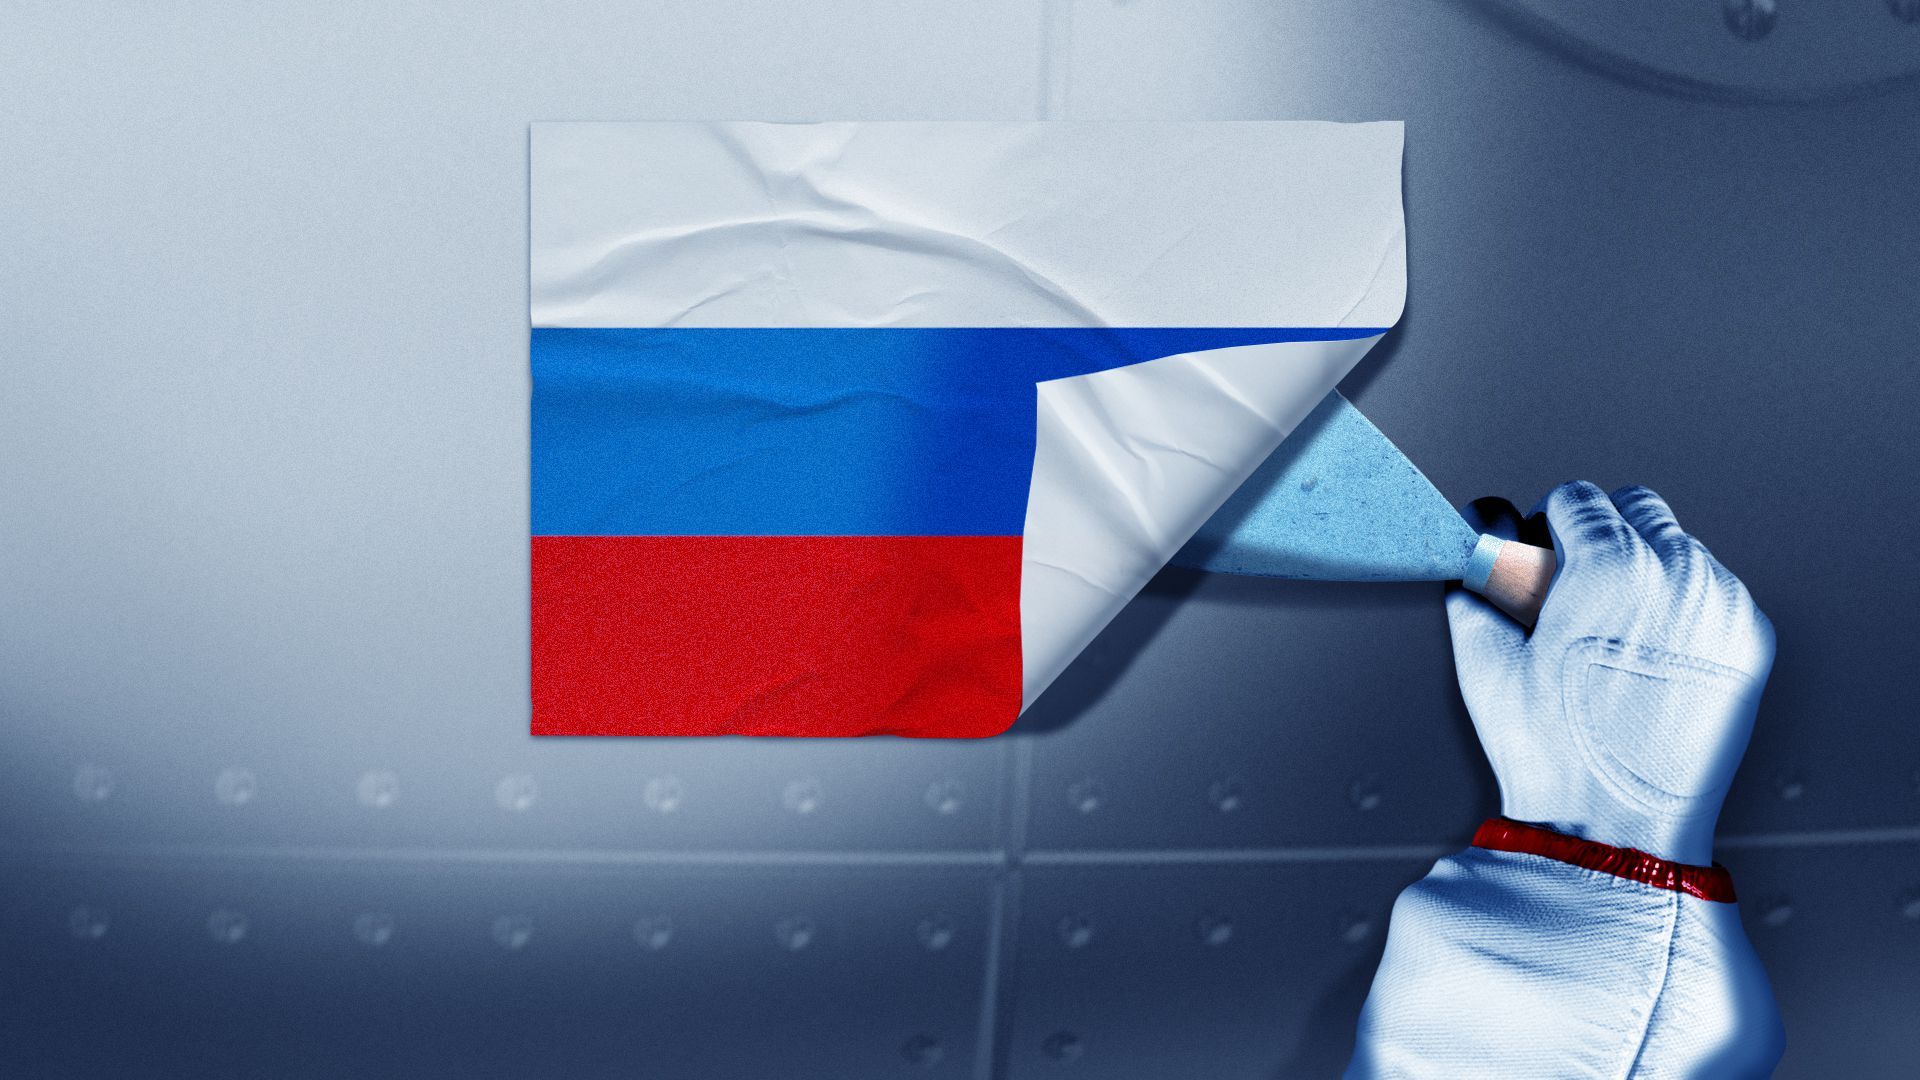 Illustration of an astronaut scraping a Russian flag sticker off the side of a space station